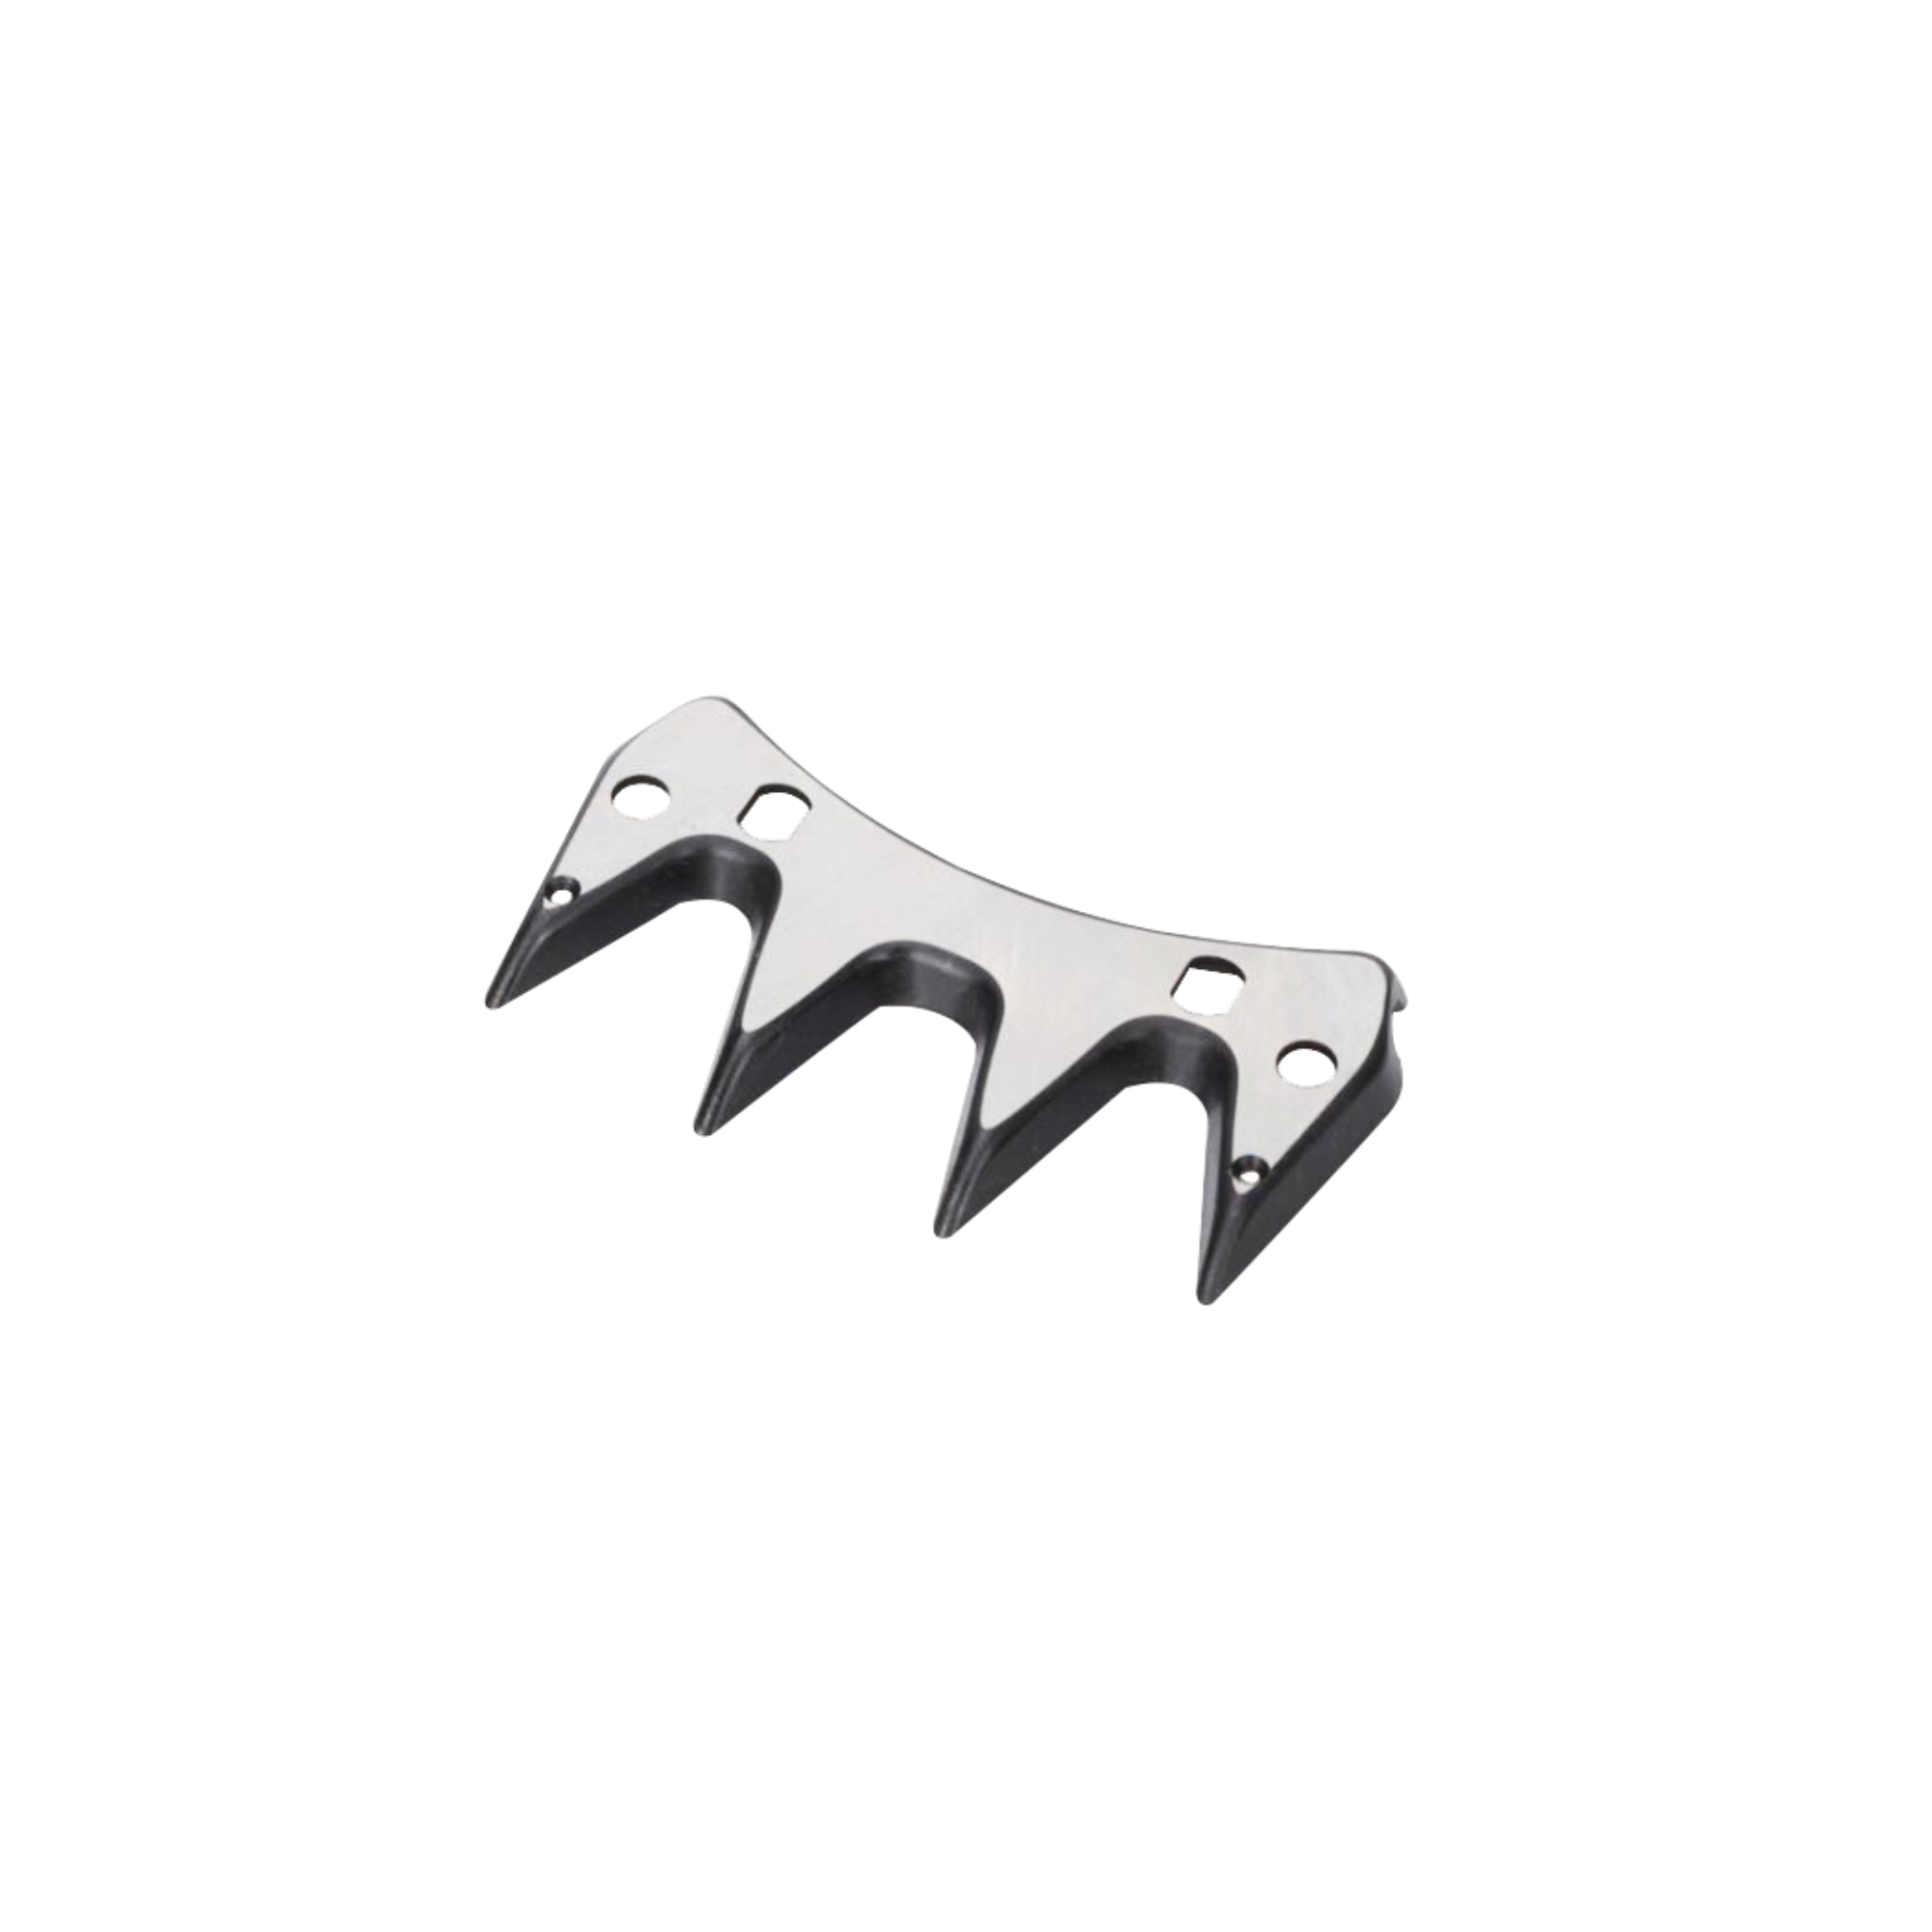 Sheep Shears Pro Replacement/Additional Beiyuan Clipper Blades for SSP